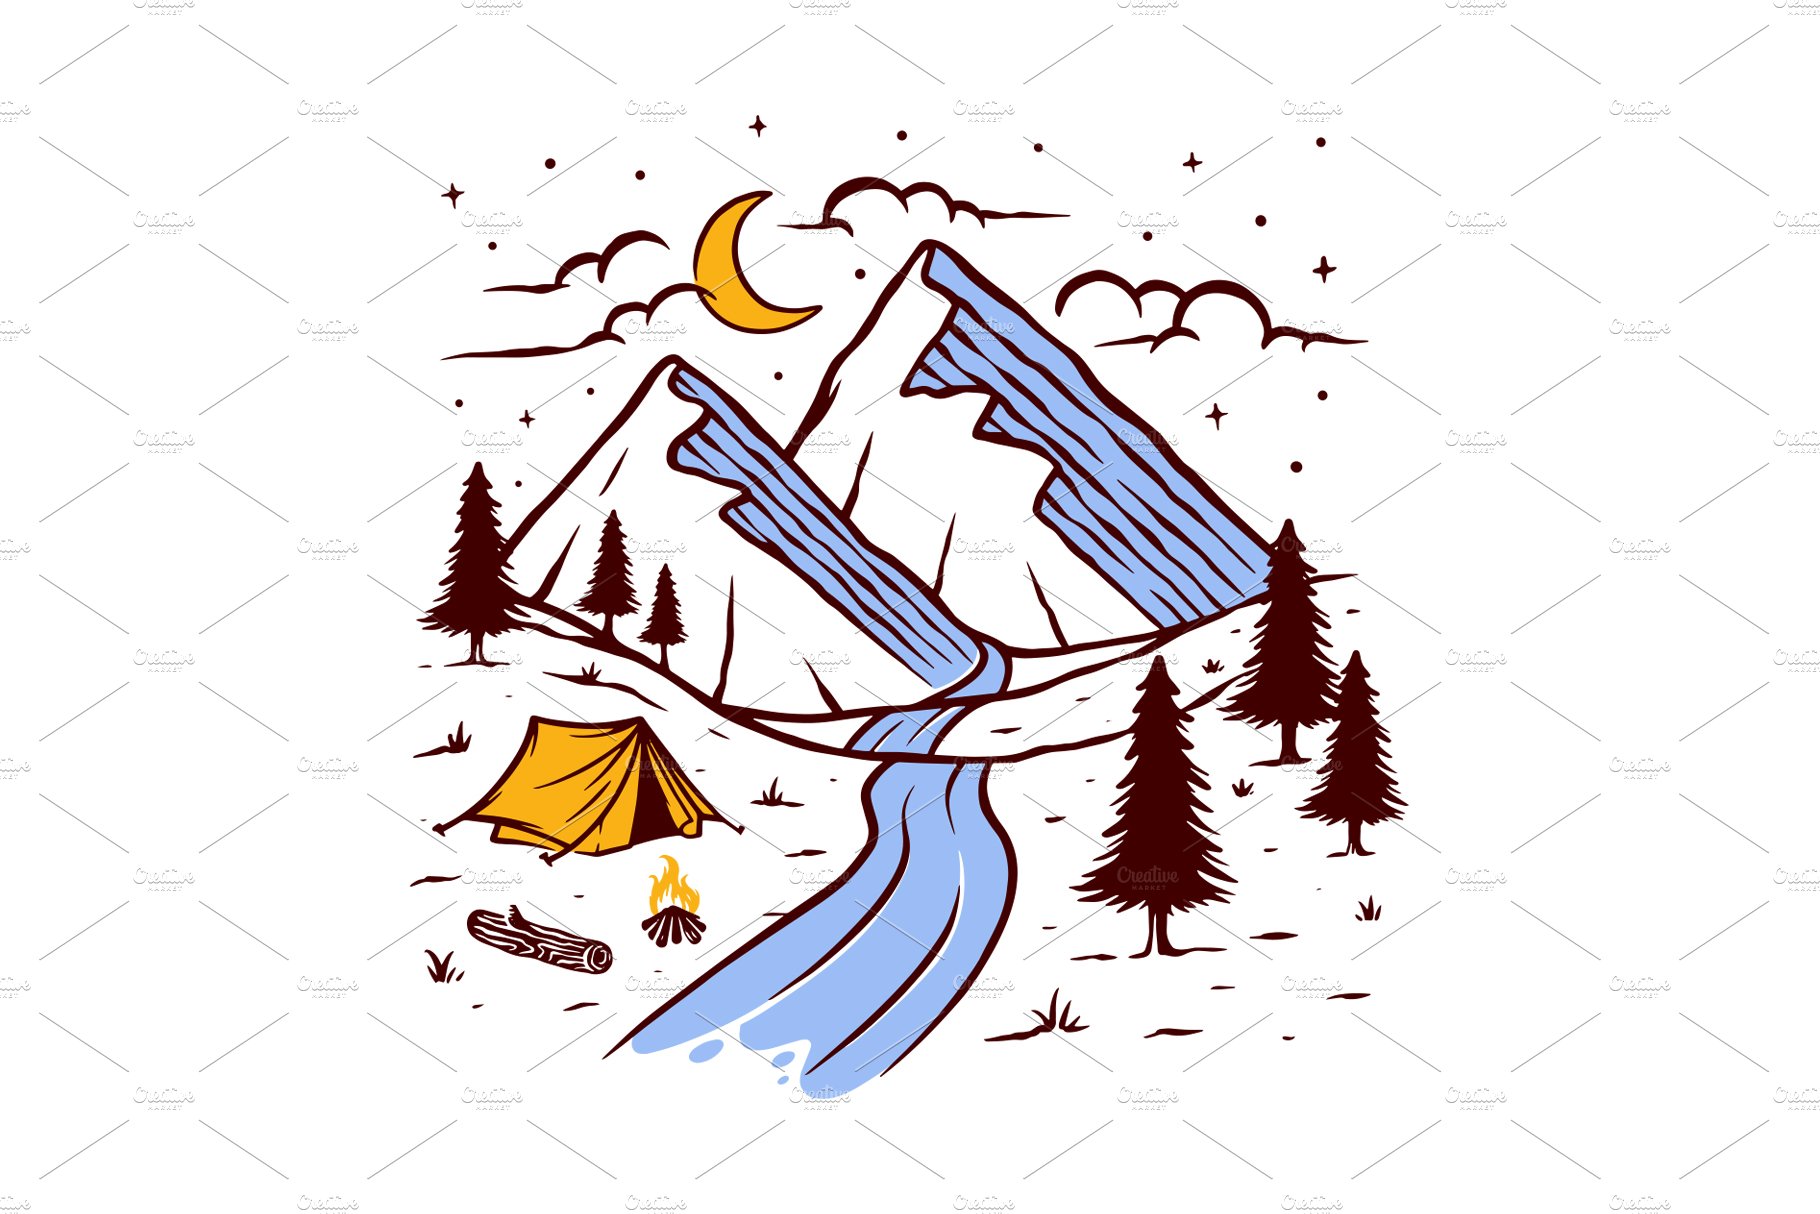 camping on the mountain at night cover image.